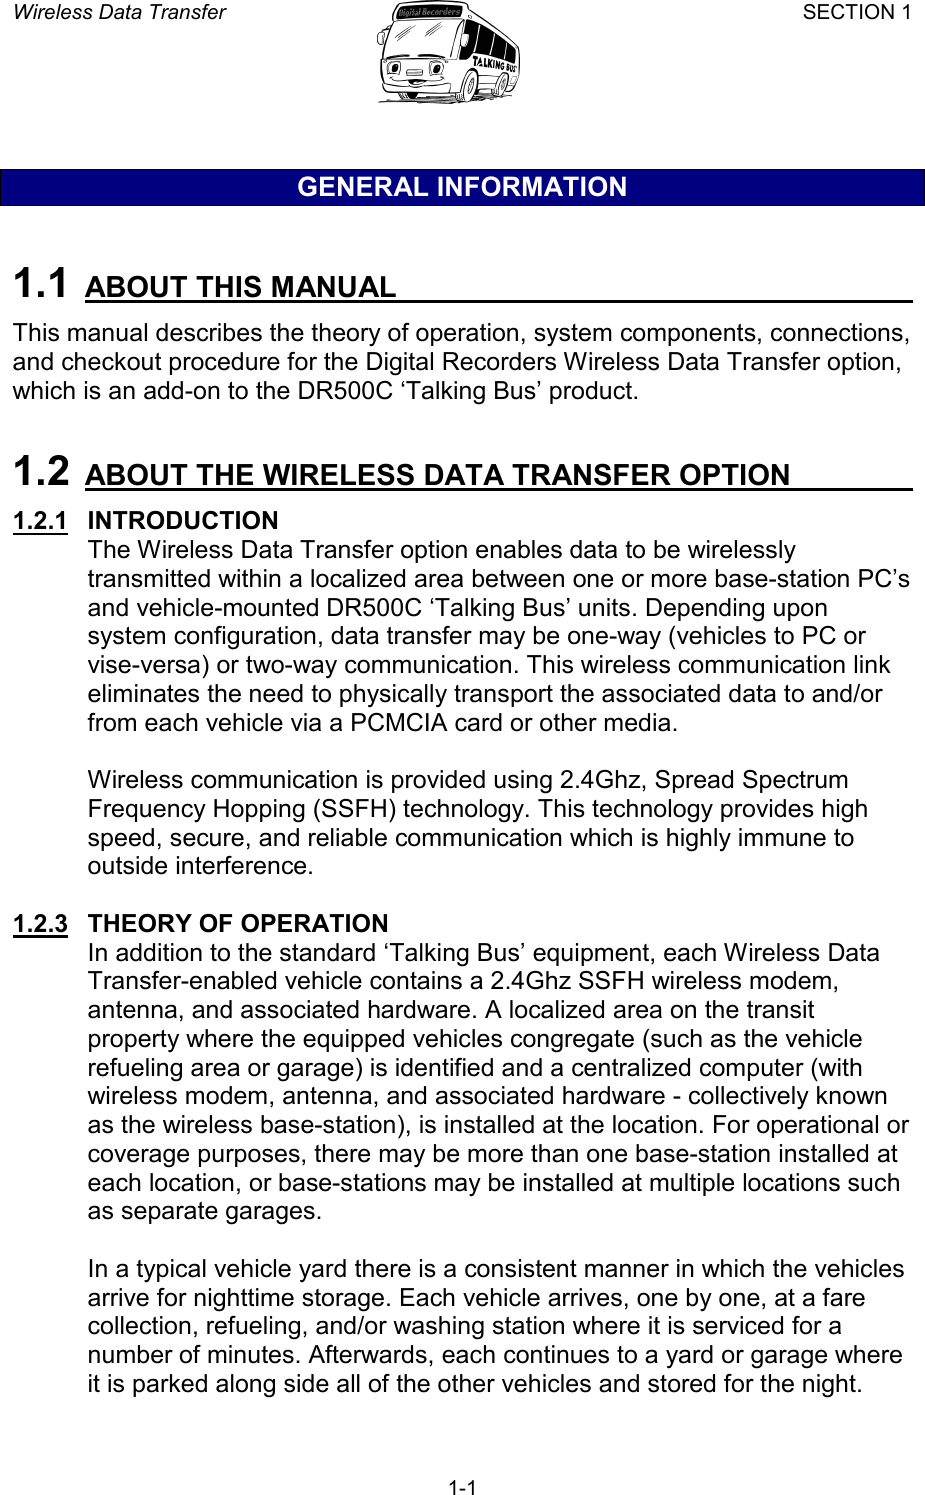 Wireless Data Transfer SECTION 1       1-1 GENERAL INFORMATION  1.1  ABOUT THIS MANUAL   This manual describes the theory of operation, system components, connections, and checkout procedure for the Digital Recorders Wireless Data Transfer option, which is an add-on to the DR500C ‘Talking Bus’ product.  1.2  ABOUT THE WIRELESS DATA TRANSFER OPTION   1.2.1   INTRODUCTION The Wireless Data Transfer option enables data to be wirelessly transmitted within a localized area between one or more base-station PC’s and vehicle-mounted DR500C ‘Talking Bus’ units. Depending upon system configuration, data transfer may be one-way (vehicles to PC or vise-versa) or two-way communication. This wireless communication link eliminates the need to physically transport the associated data to and/or from each vehicle via a PCMCIA card or other media.  Wireless communication is provided using 2.4Ghz, Spread Spectrum Frequency Hopping (SSFH) technology. This technology provides high speed, secure, and reliable communication which is highly immune to outside interference.  1.2.3   THEORY OF OPERATION In addition to the standard ‘Talking Bus’ equipment, each Wireless Data Transfer-enabled vehicle contains a 2.4Ghz SSFH wireless modem, antenna, and associated hardware. A localized area on the transit property where the equipped vehicles congregate (such as the vehicle refueling area or garage) is identified and a centralized computer (with wireless modem, antenna, and associated hardware - collectively known as the wireless base-station), is installed at the location. For operational or coverage purposes, there may be more than one base-station installed at each location, or base-stations may be installed at multiple locations such as separate garages.  In a typical vehicle yard there is a consistent manner in which the vehicles arrive for nighttime storage. Each vehicle arrives, one by one, at a fare collection, refueling, and/or washing station where it is serviced for a number of minutes. Afterwards, each continues to a yard or garage where it is parked along side all of the other vehicles and stored for the night. 